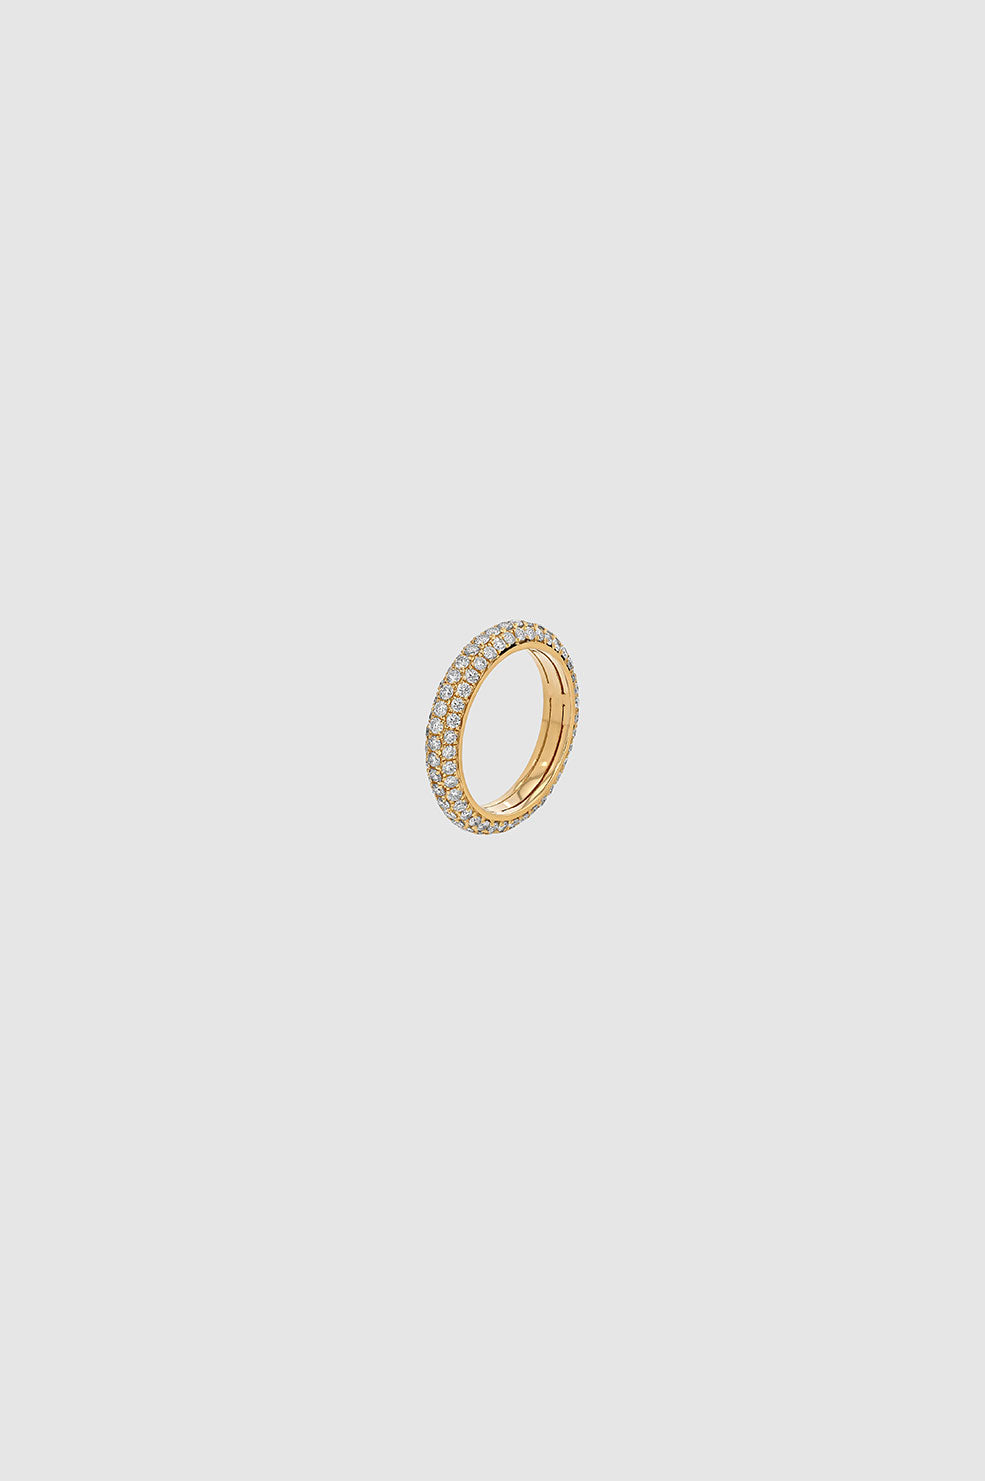 ANINE BING Delicate Diamond Pinky Ring - 14k Gold - Side View